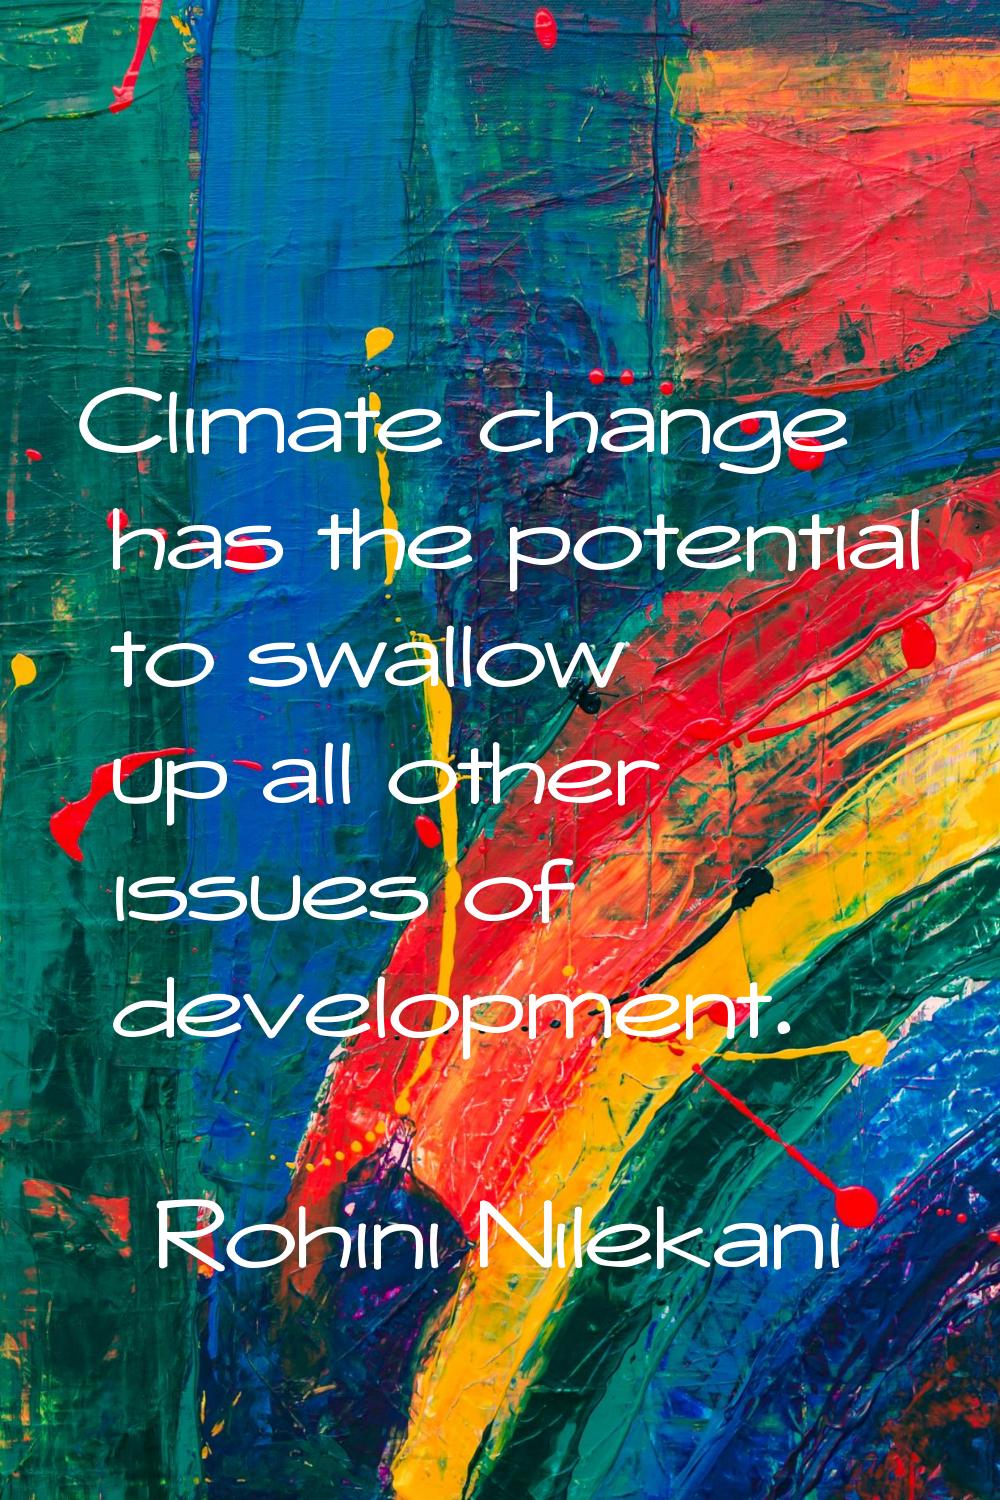 Climate change has the potential to swallow up all other issues of development.